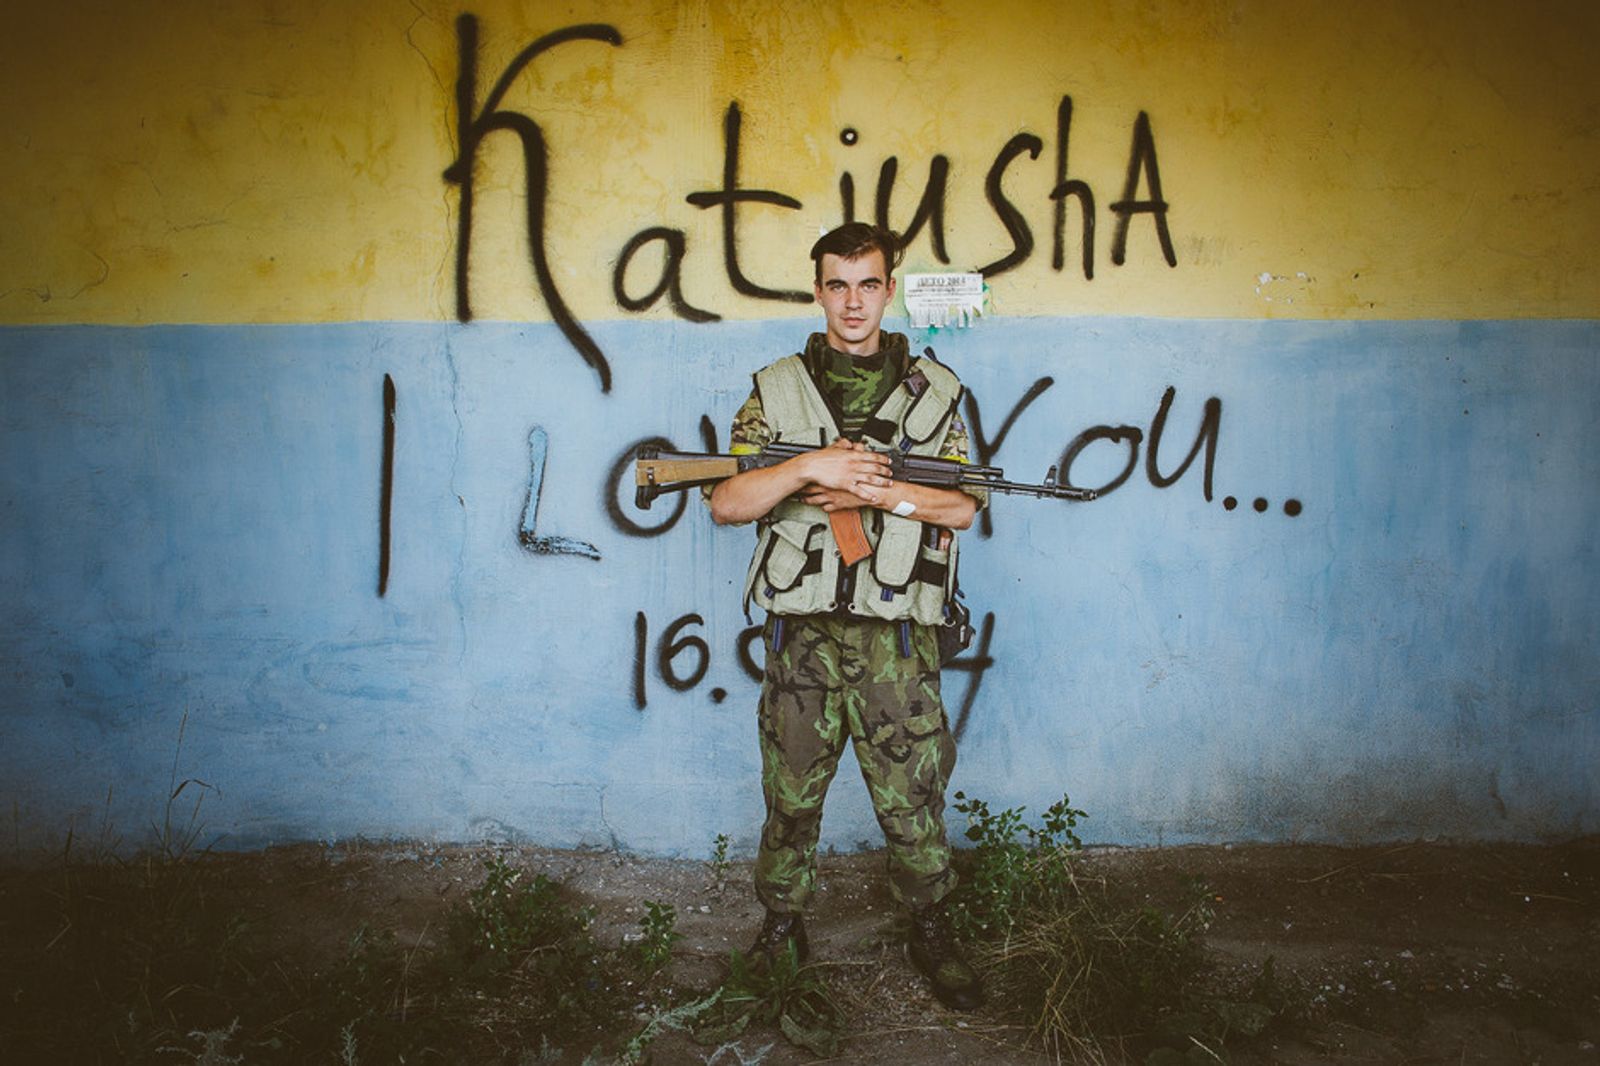 © Alexander Vasukovich - Image from the War among sunflowers. Volunteers of Donbass photography project